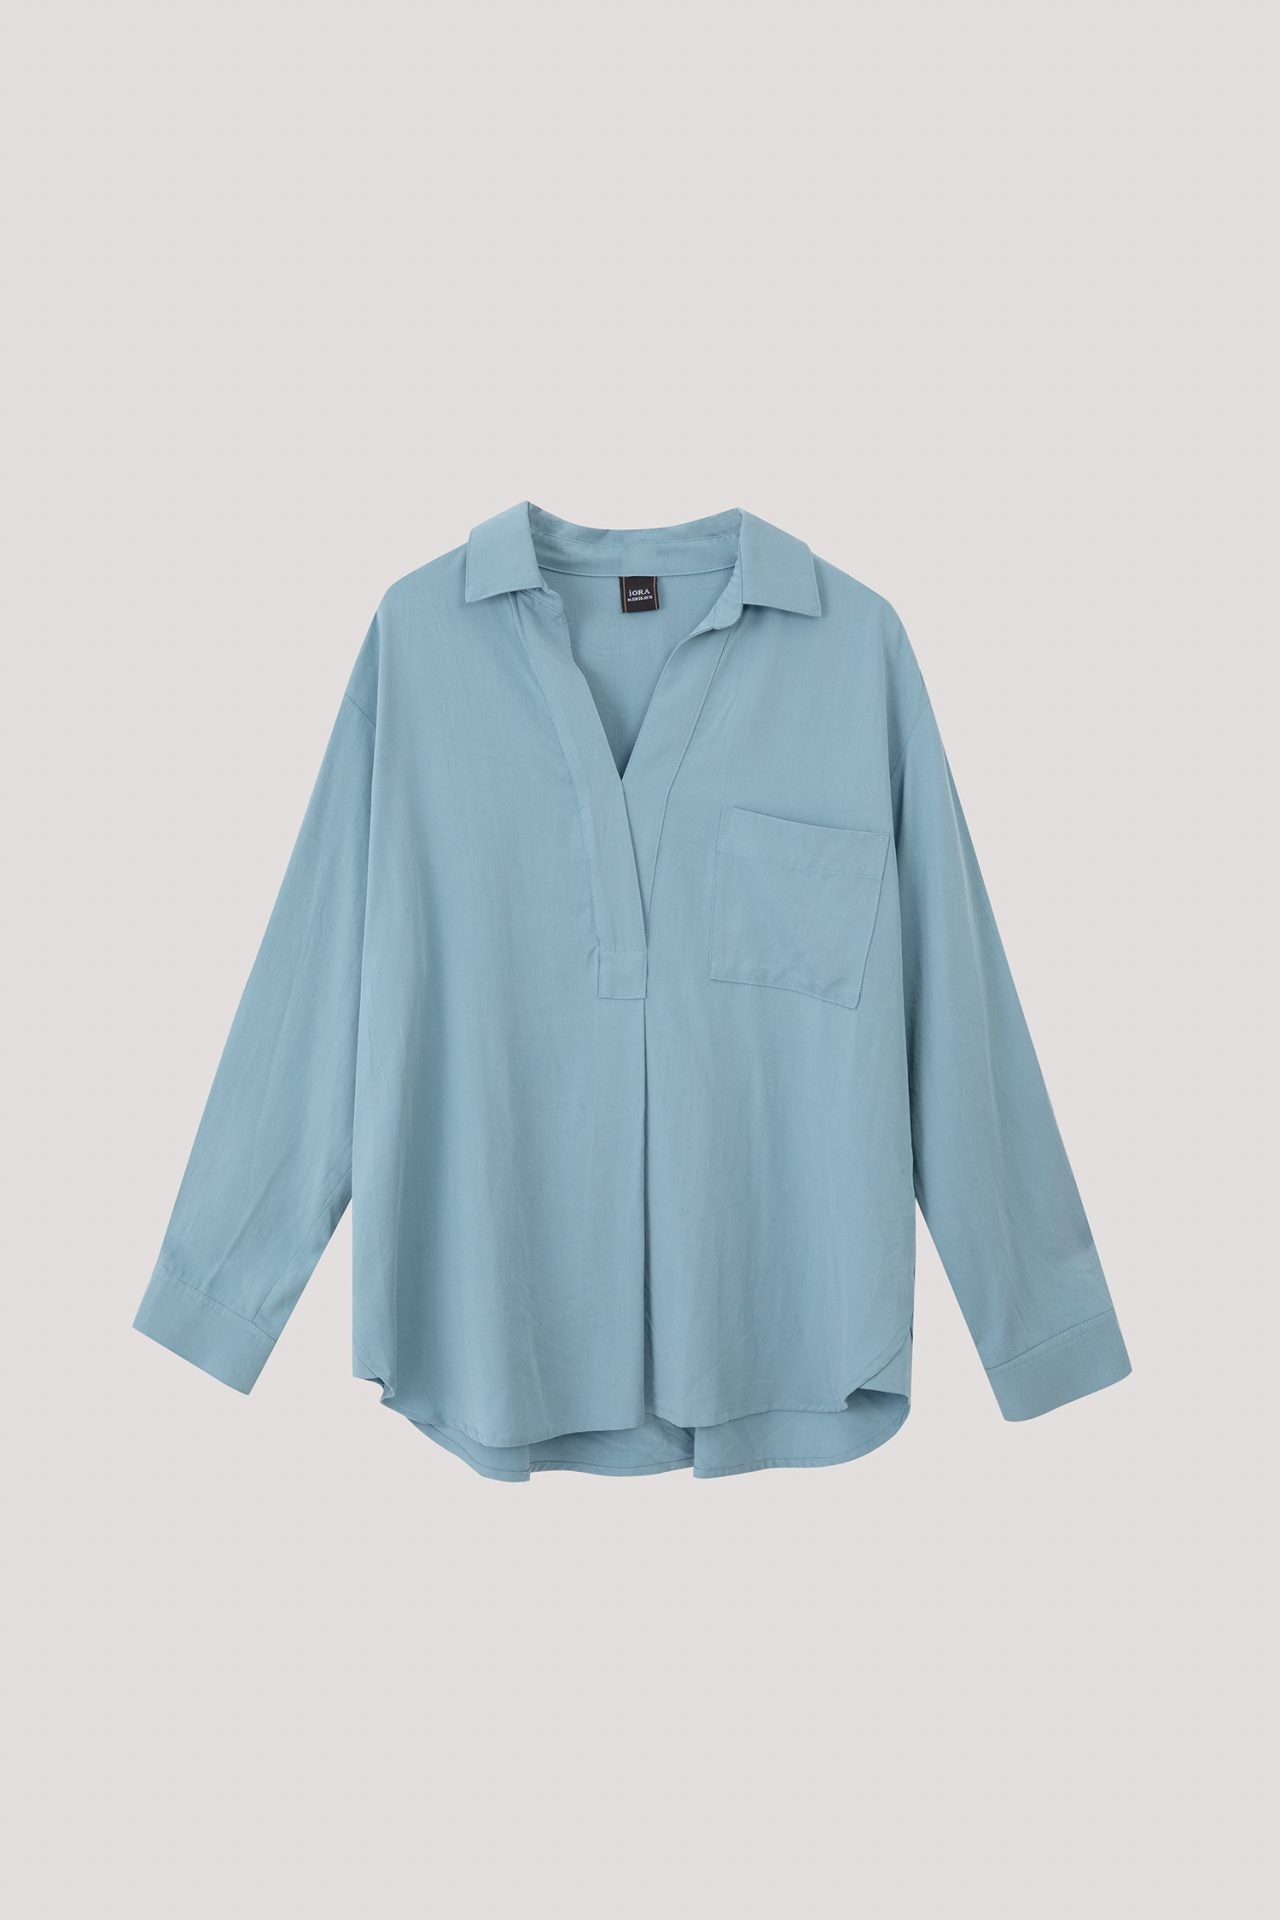 ABB 9826 OPEN COLLAR TURN UP CUFFED BLOUSE BABY BLUE